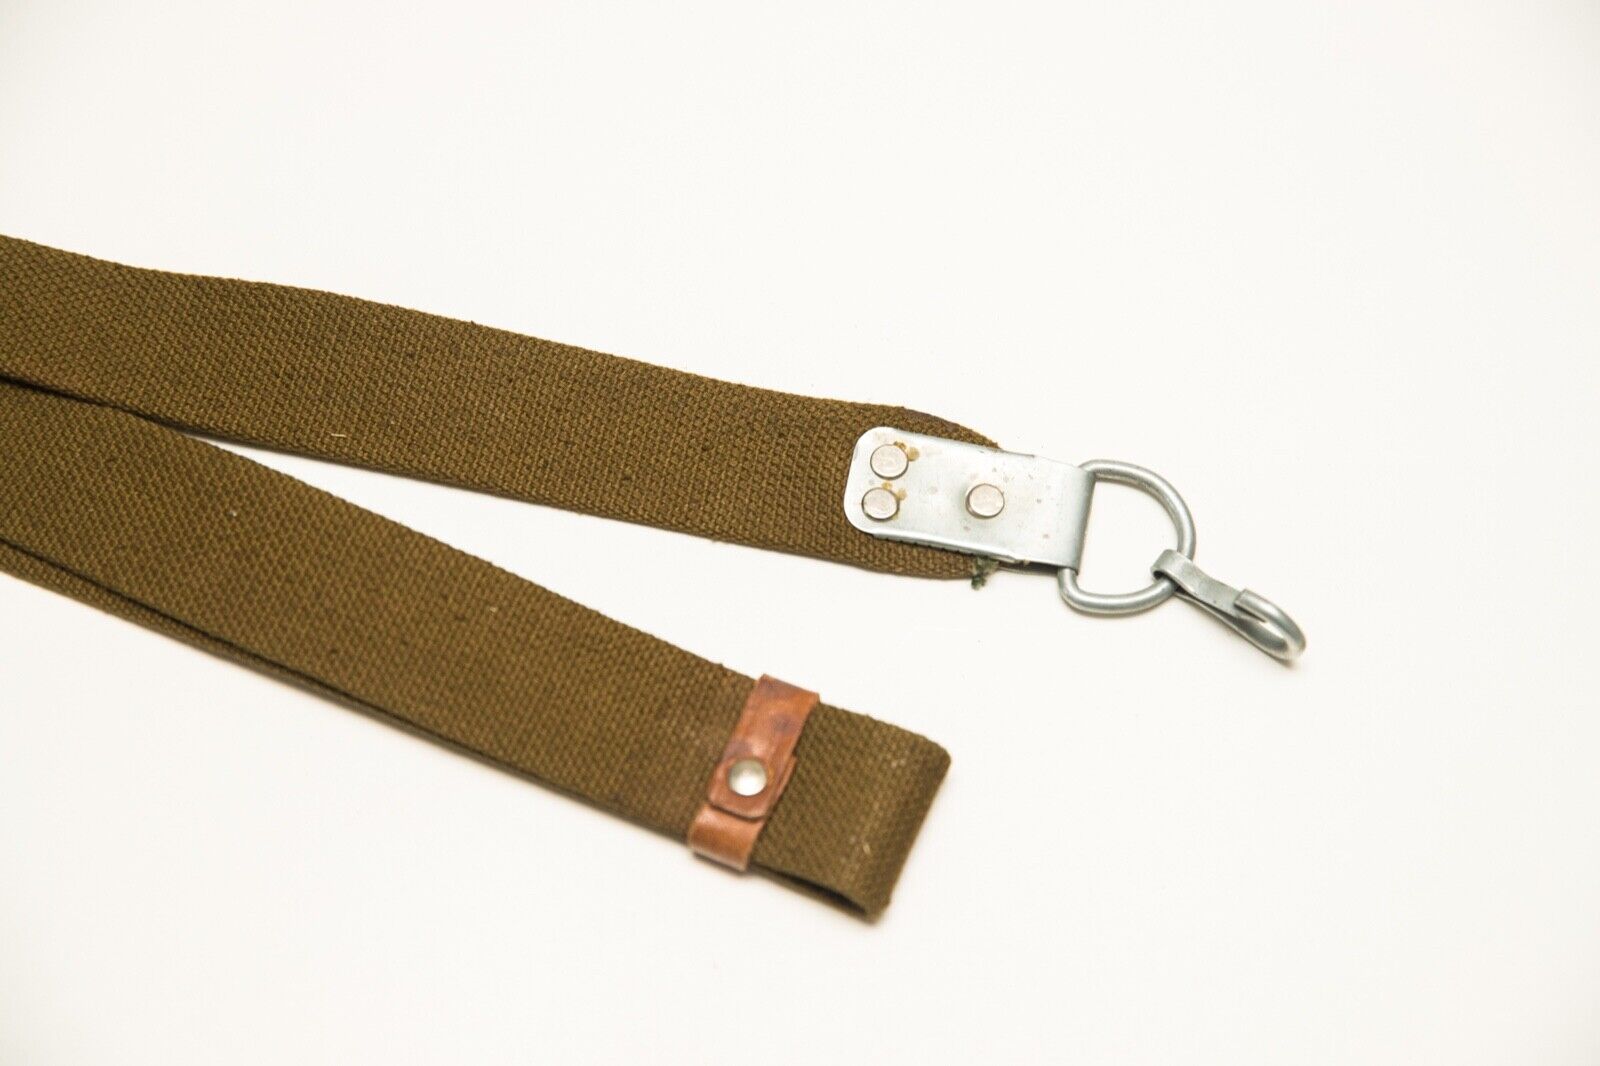 Original Russian single hooked canvas sling for sporting and hunting.